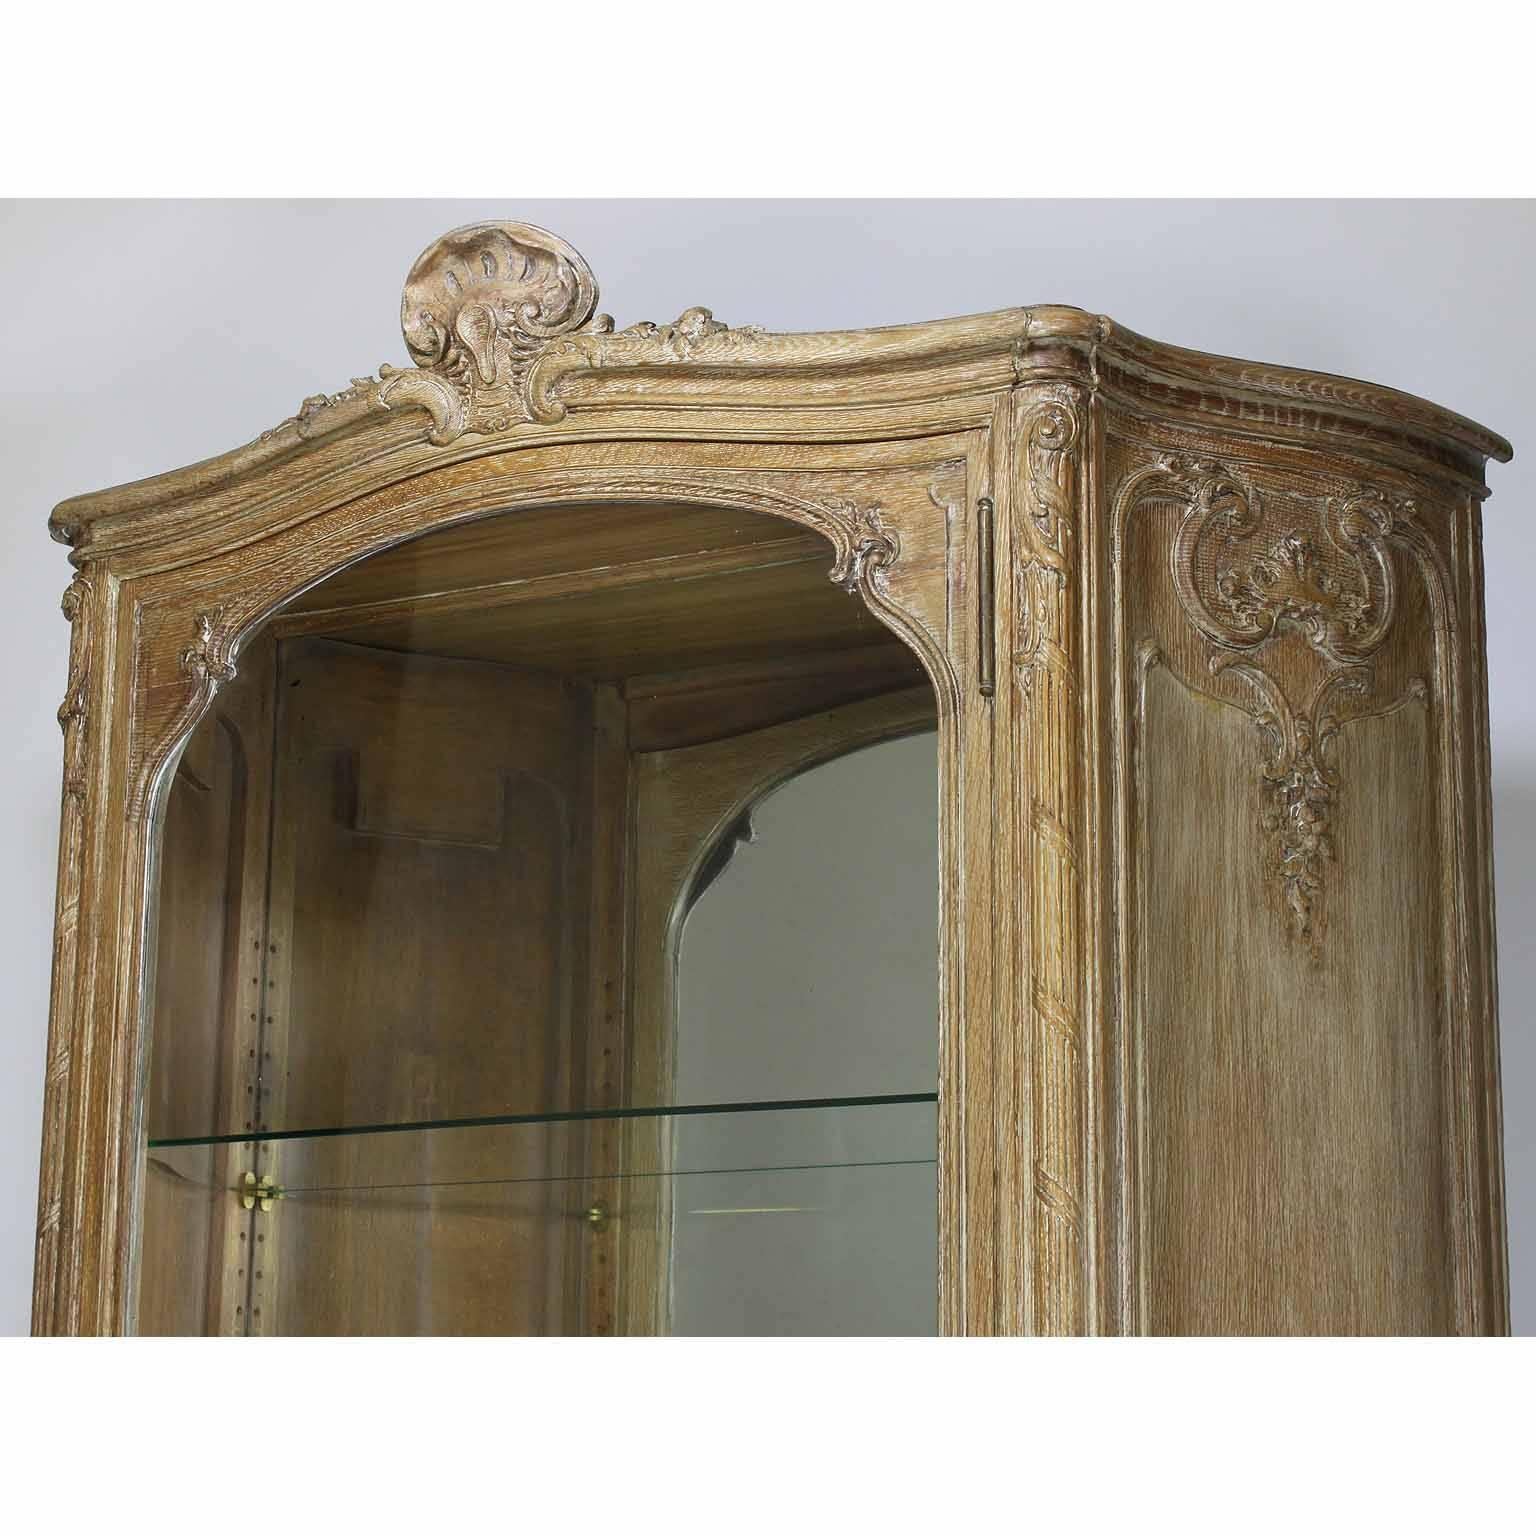 A fine 19th century Louis XV style country French - Provincial carved white-washed walnut bombé credenza vitrine. The slender and tall carved single-door vitrine with a bowed front glass door and three adjustable glass shelves, crowned with a carved